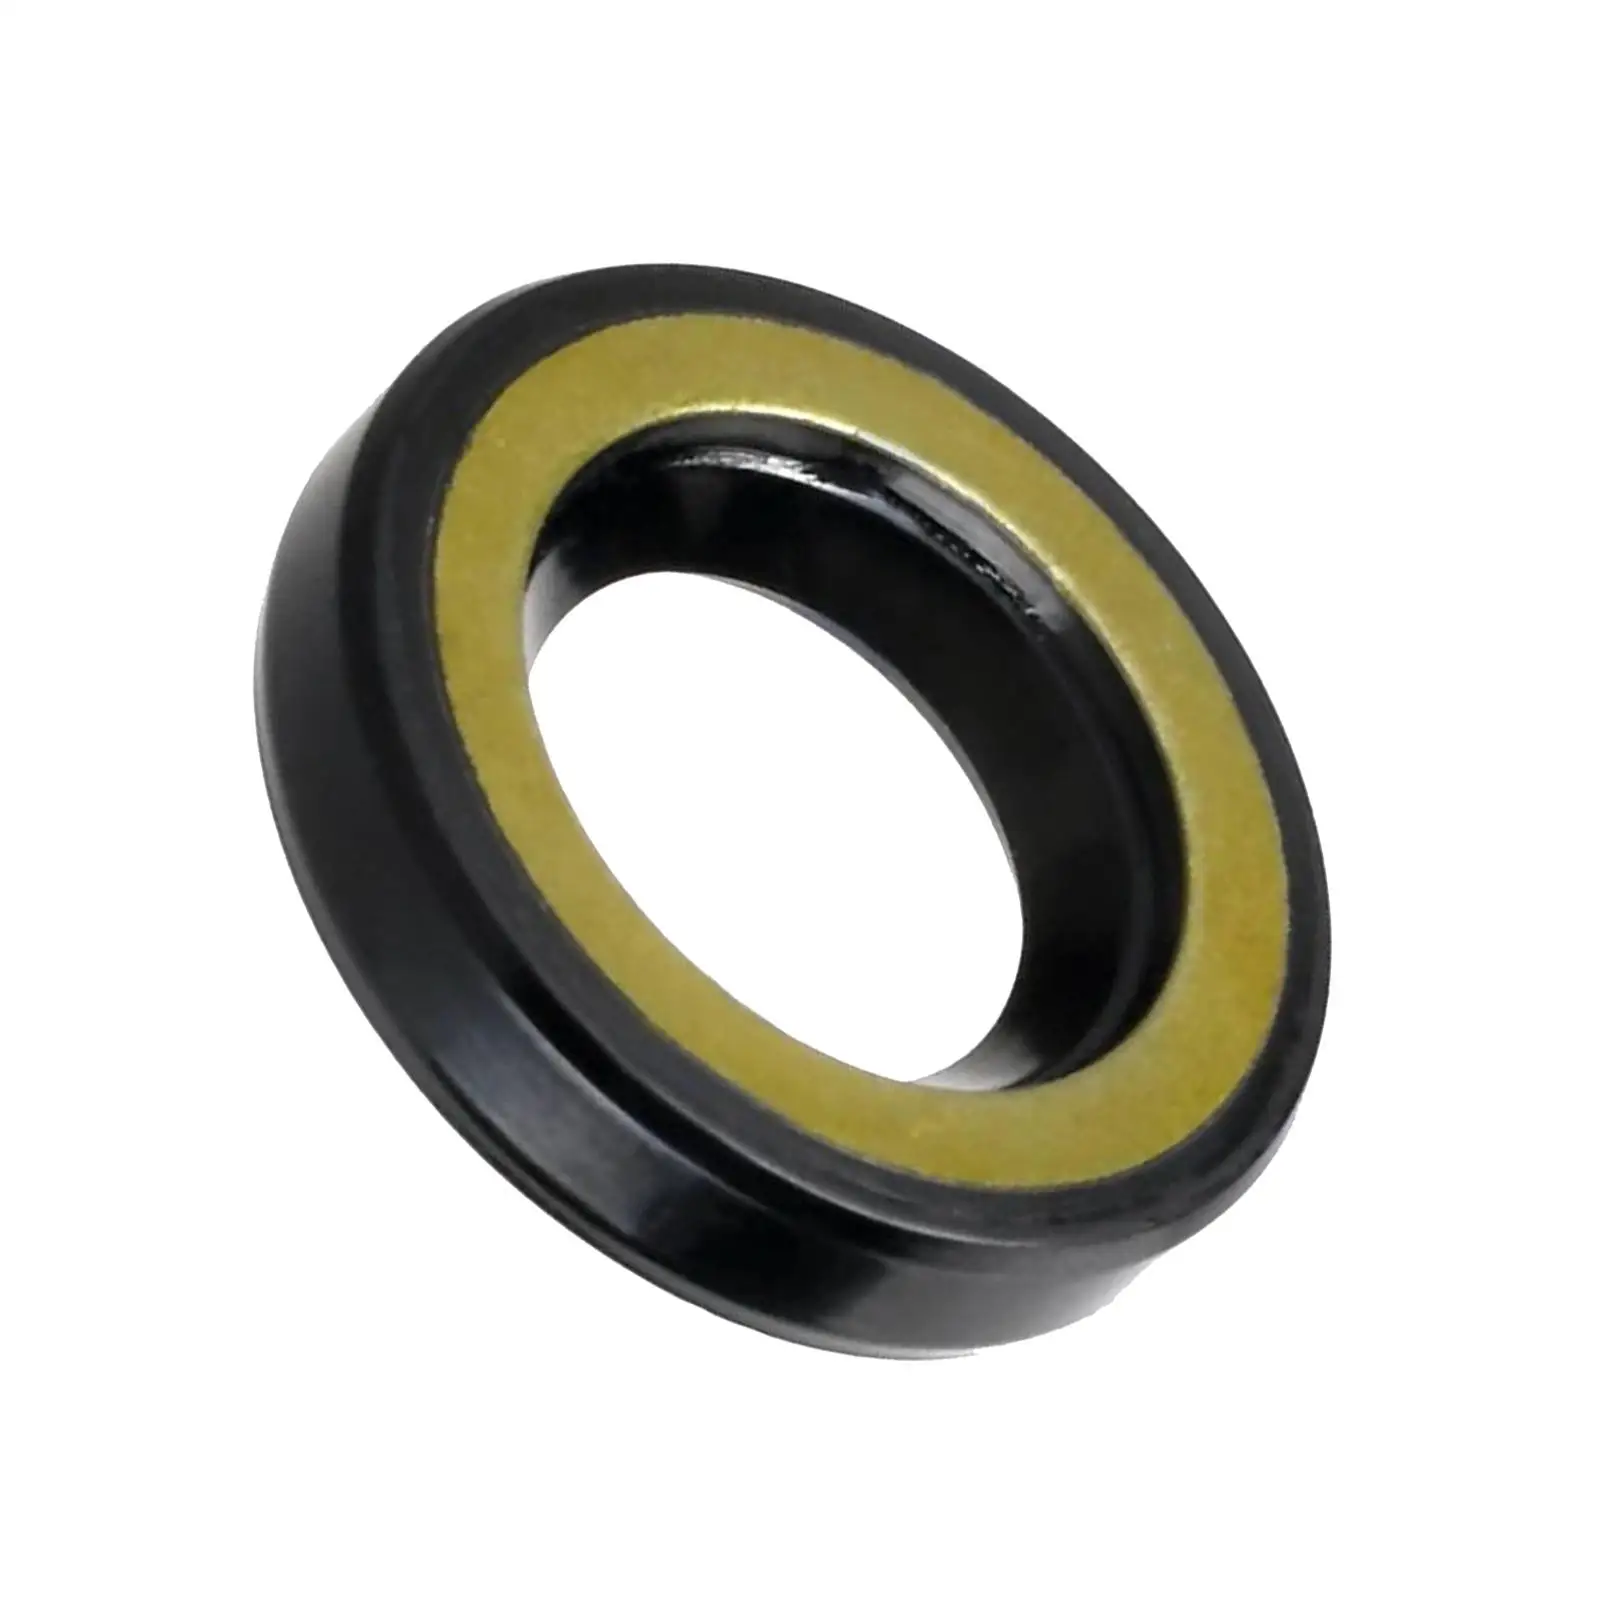 93101-20M07 Oil Seal Outboard Propeller Shaft Seal for Yamaha Outboard Engine 2T 25HP 30HP Accessories Easy Installation